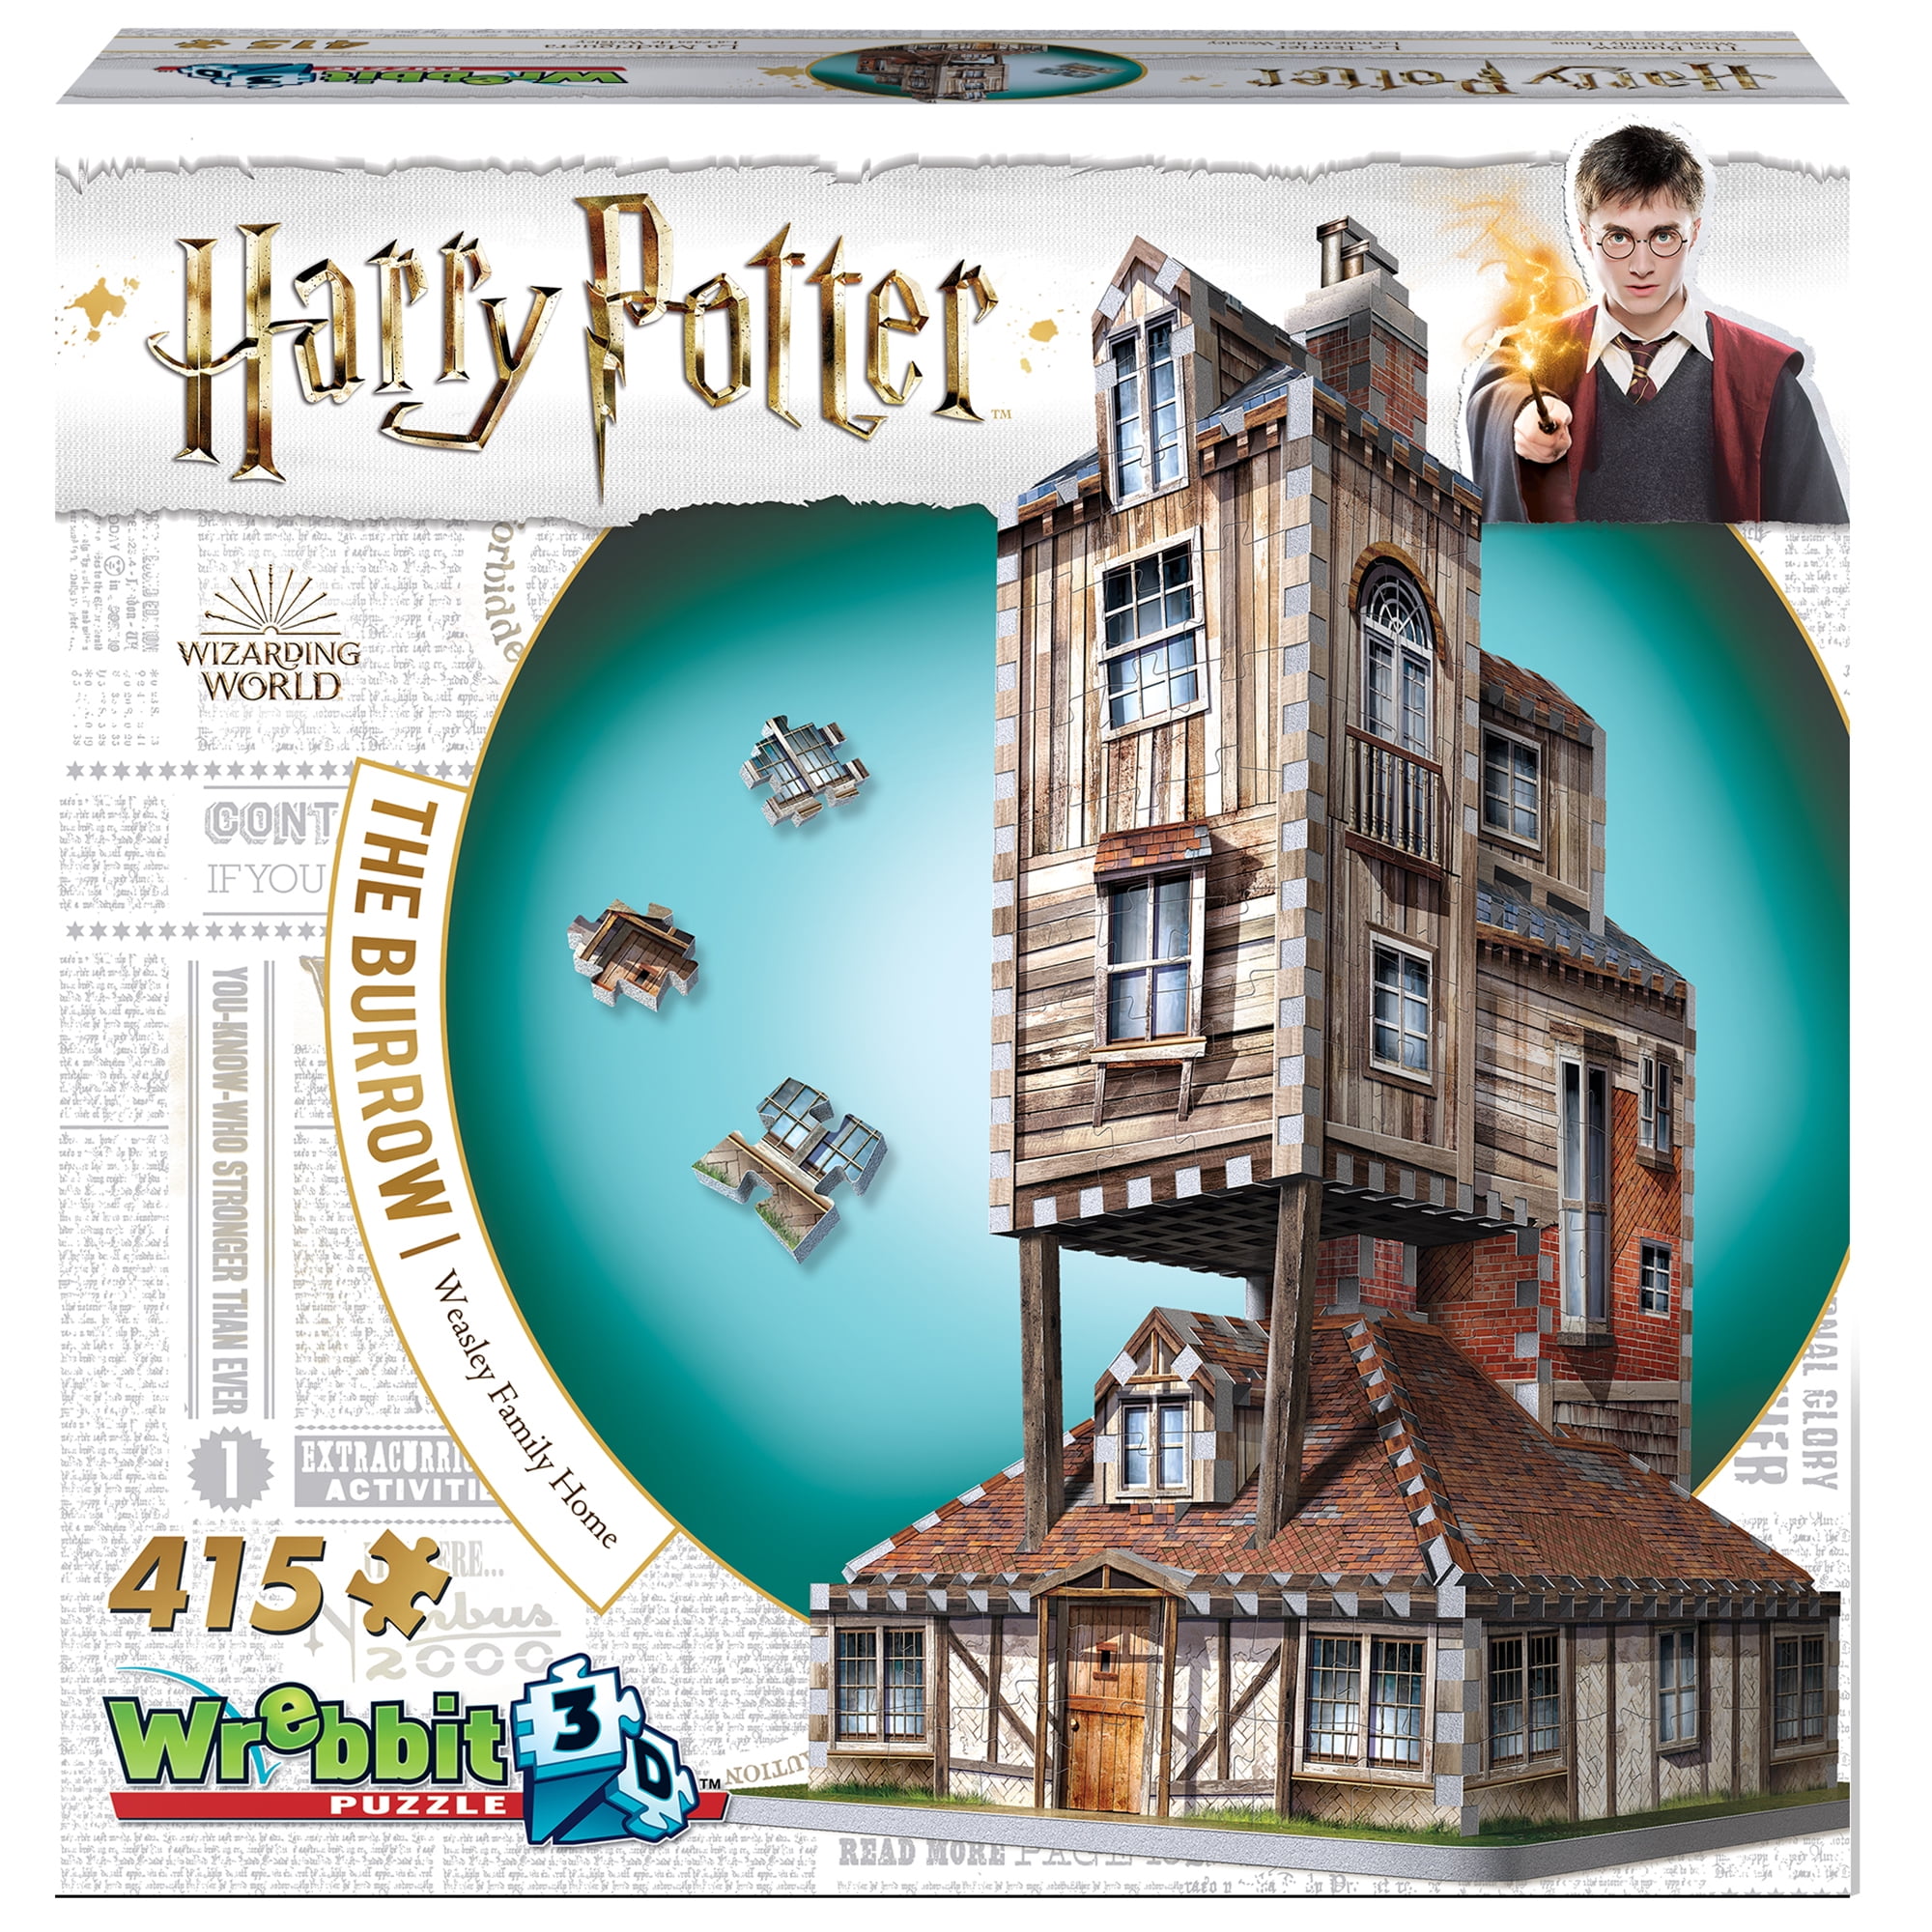 415 Piece 3D Jigsaw Puzzle Made Harry Potters The Burrow Weasley Family Home